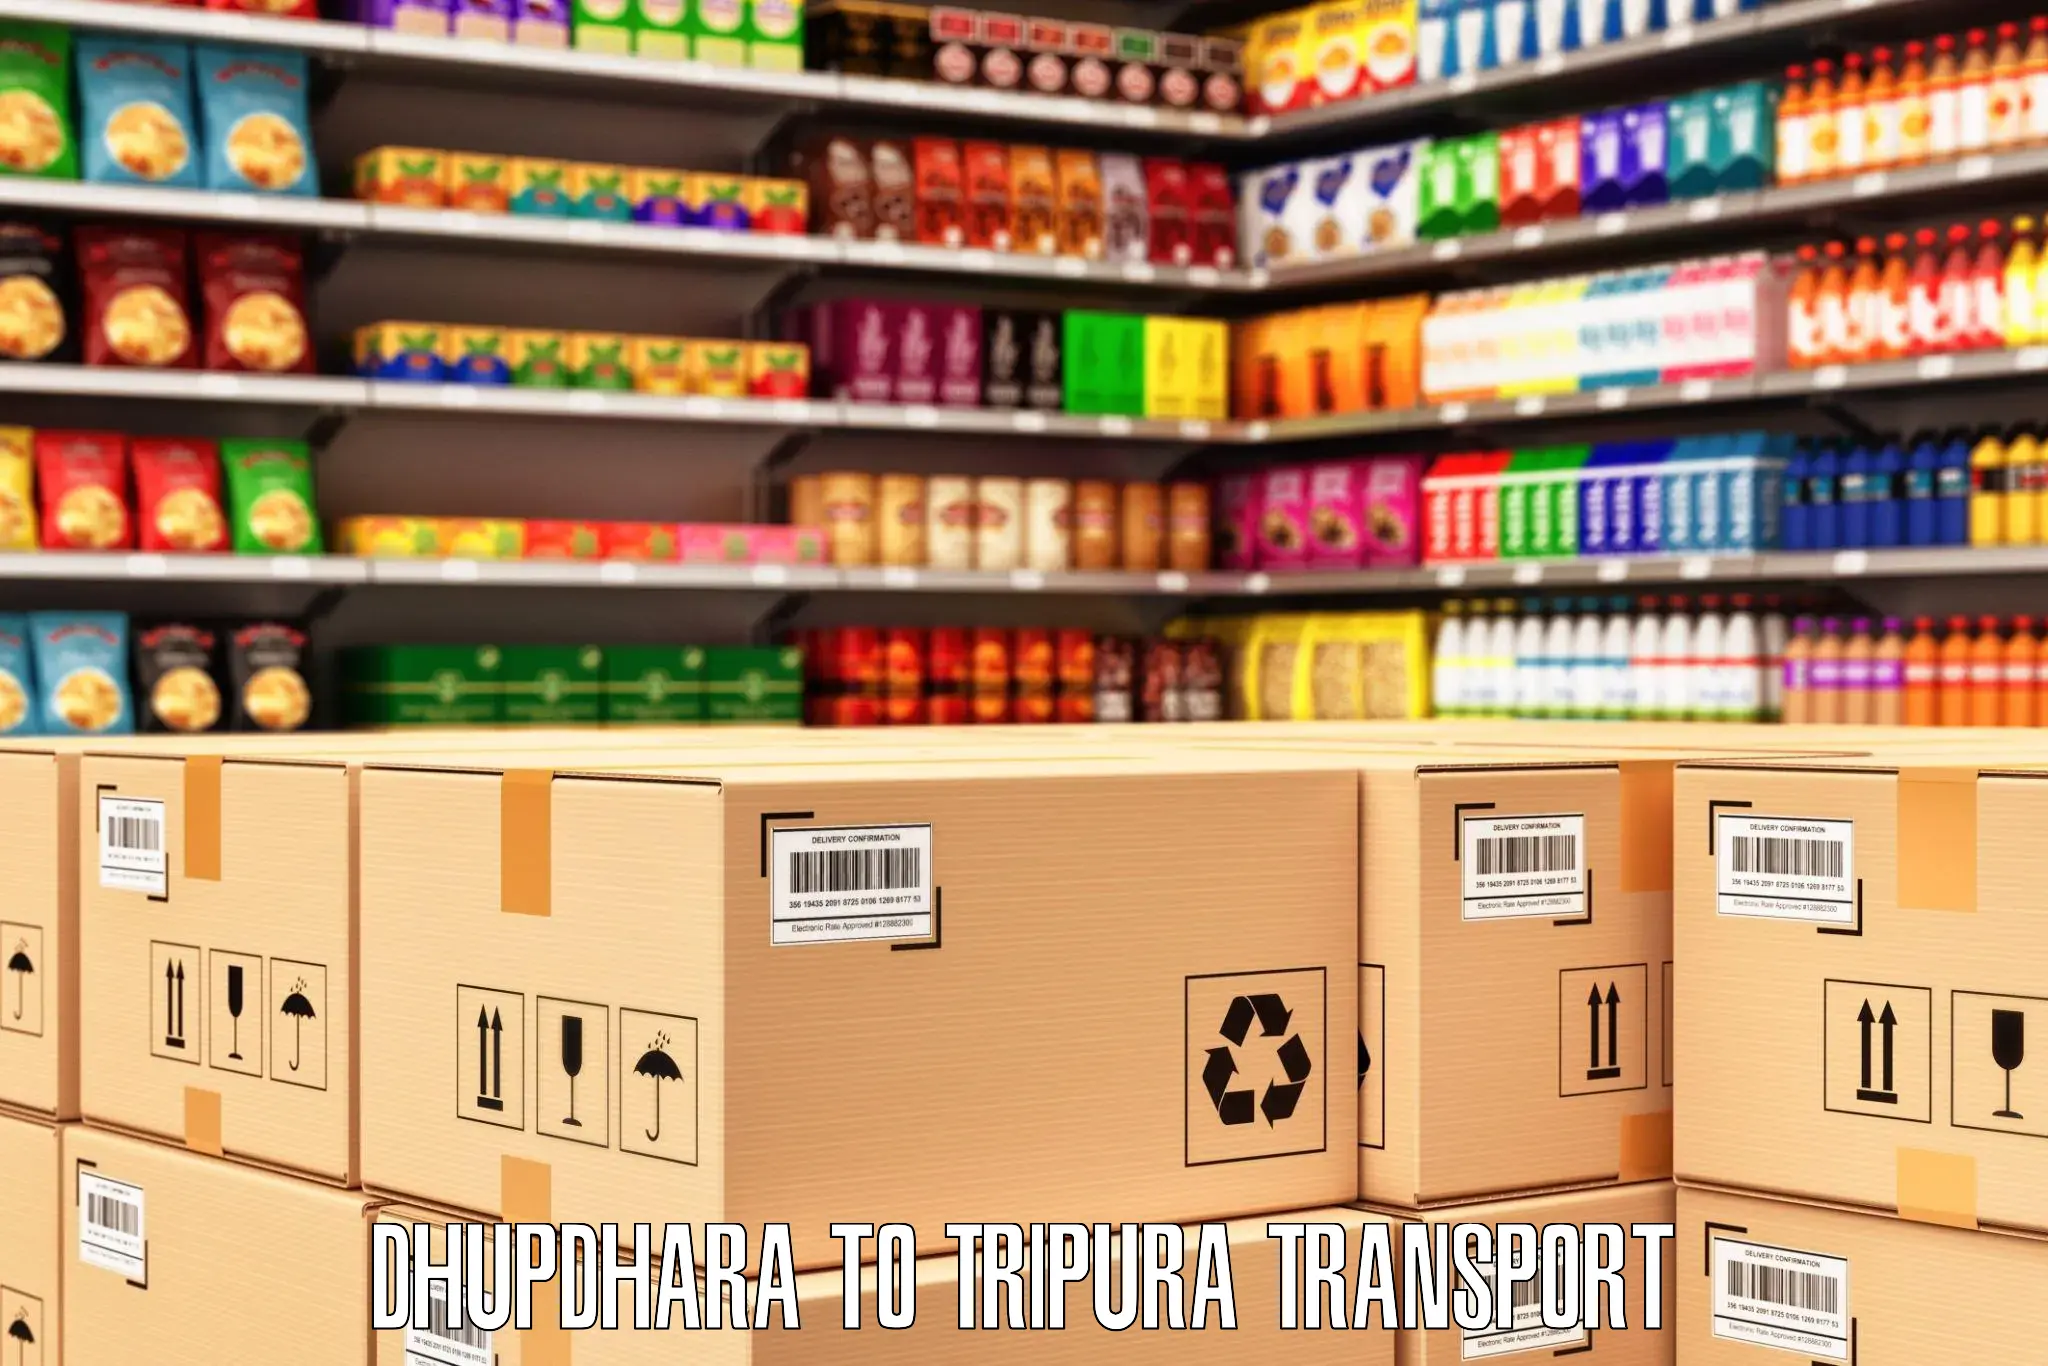 Best transport services in India Dhupdhara to Udaipur Tripura